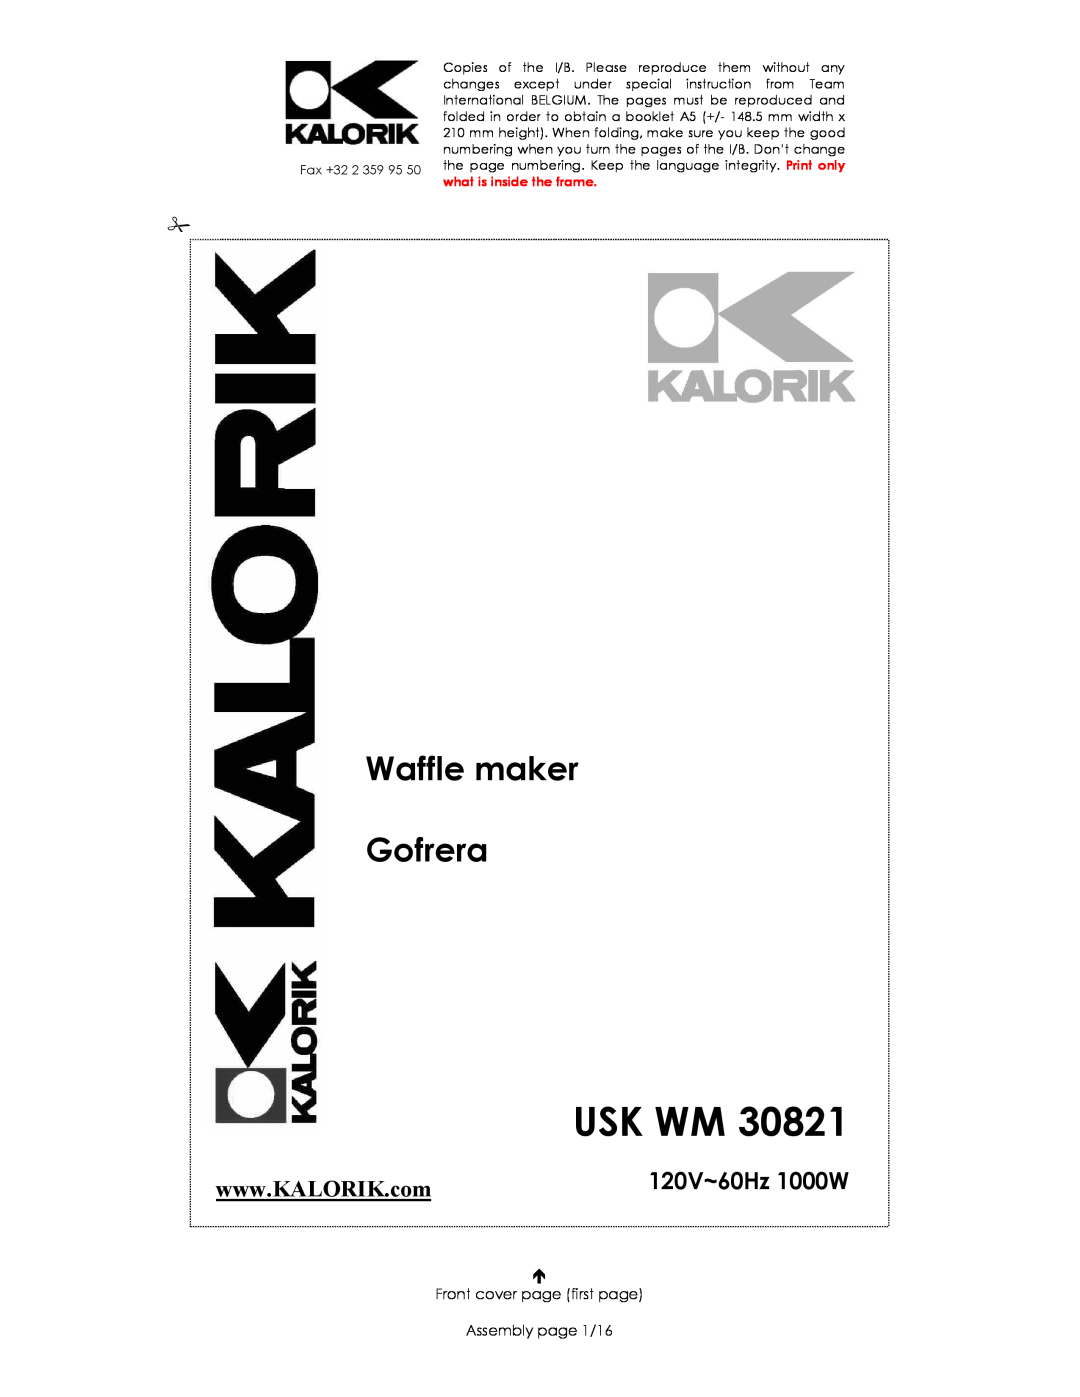 Kalorik USK WM 30821 manual Usk Wm, Waffle maker Gofrera, 120V~60Hz 1000W, Front cover page first page Assembly page 1/16 